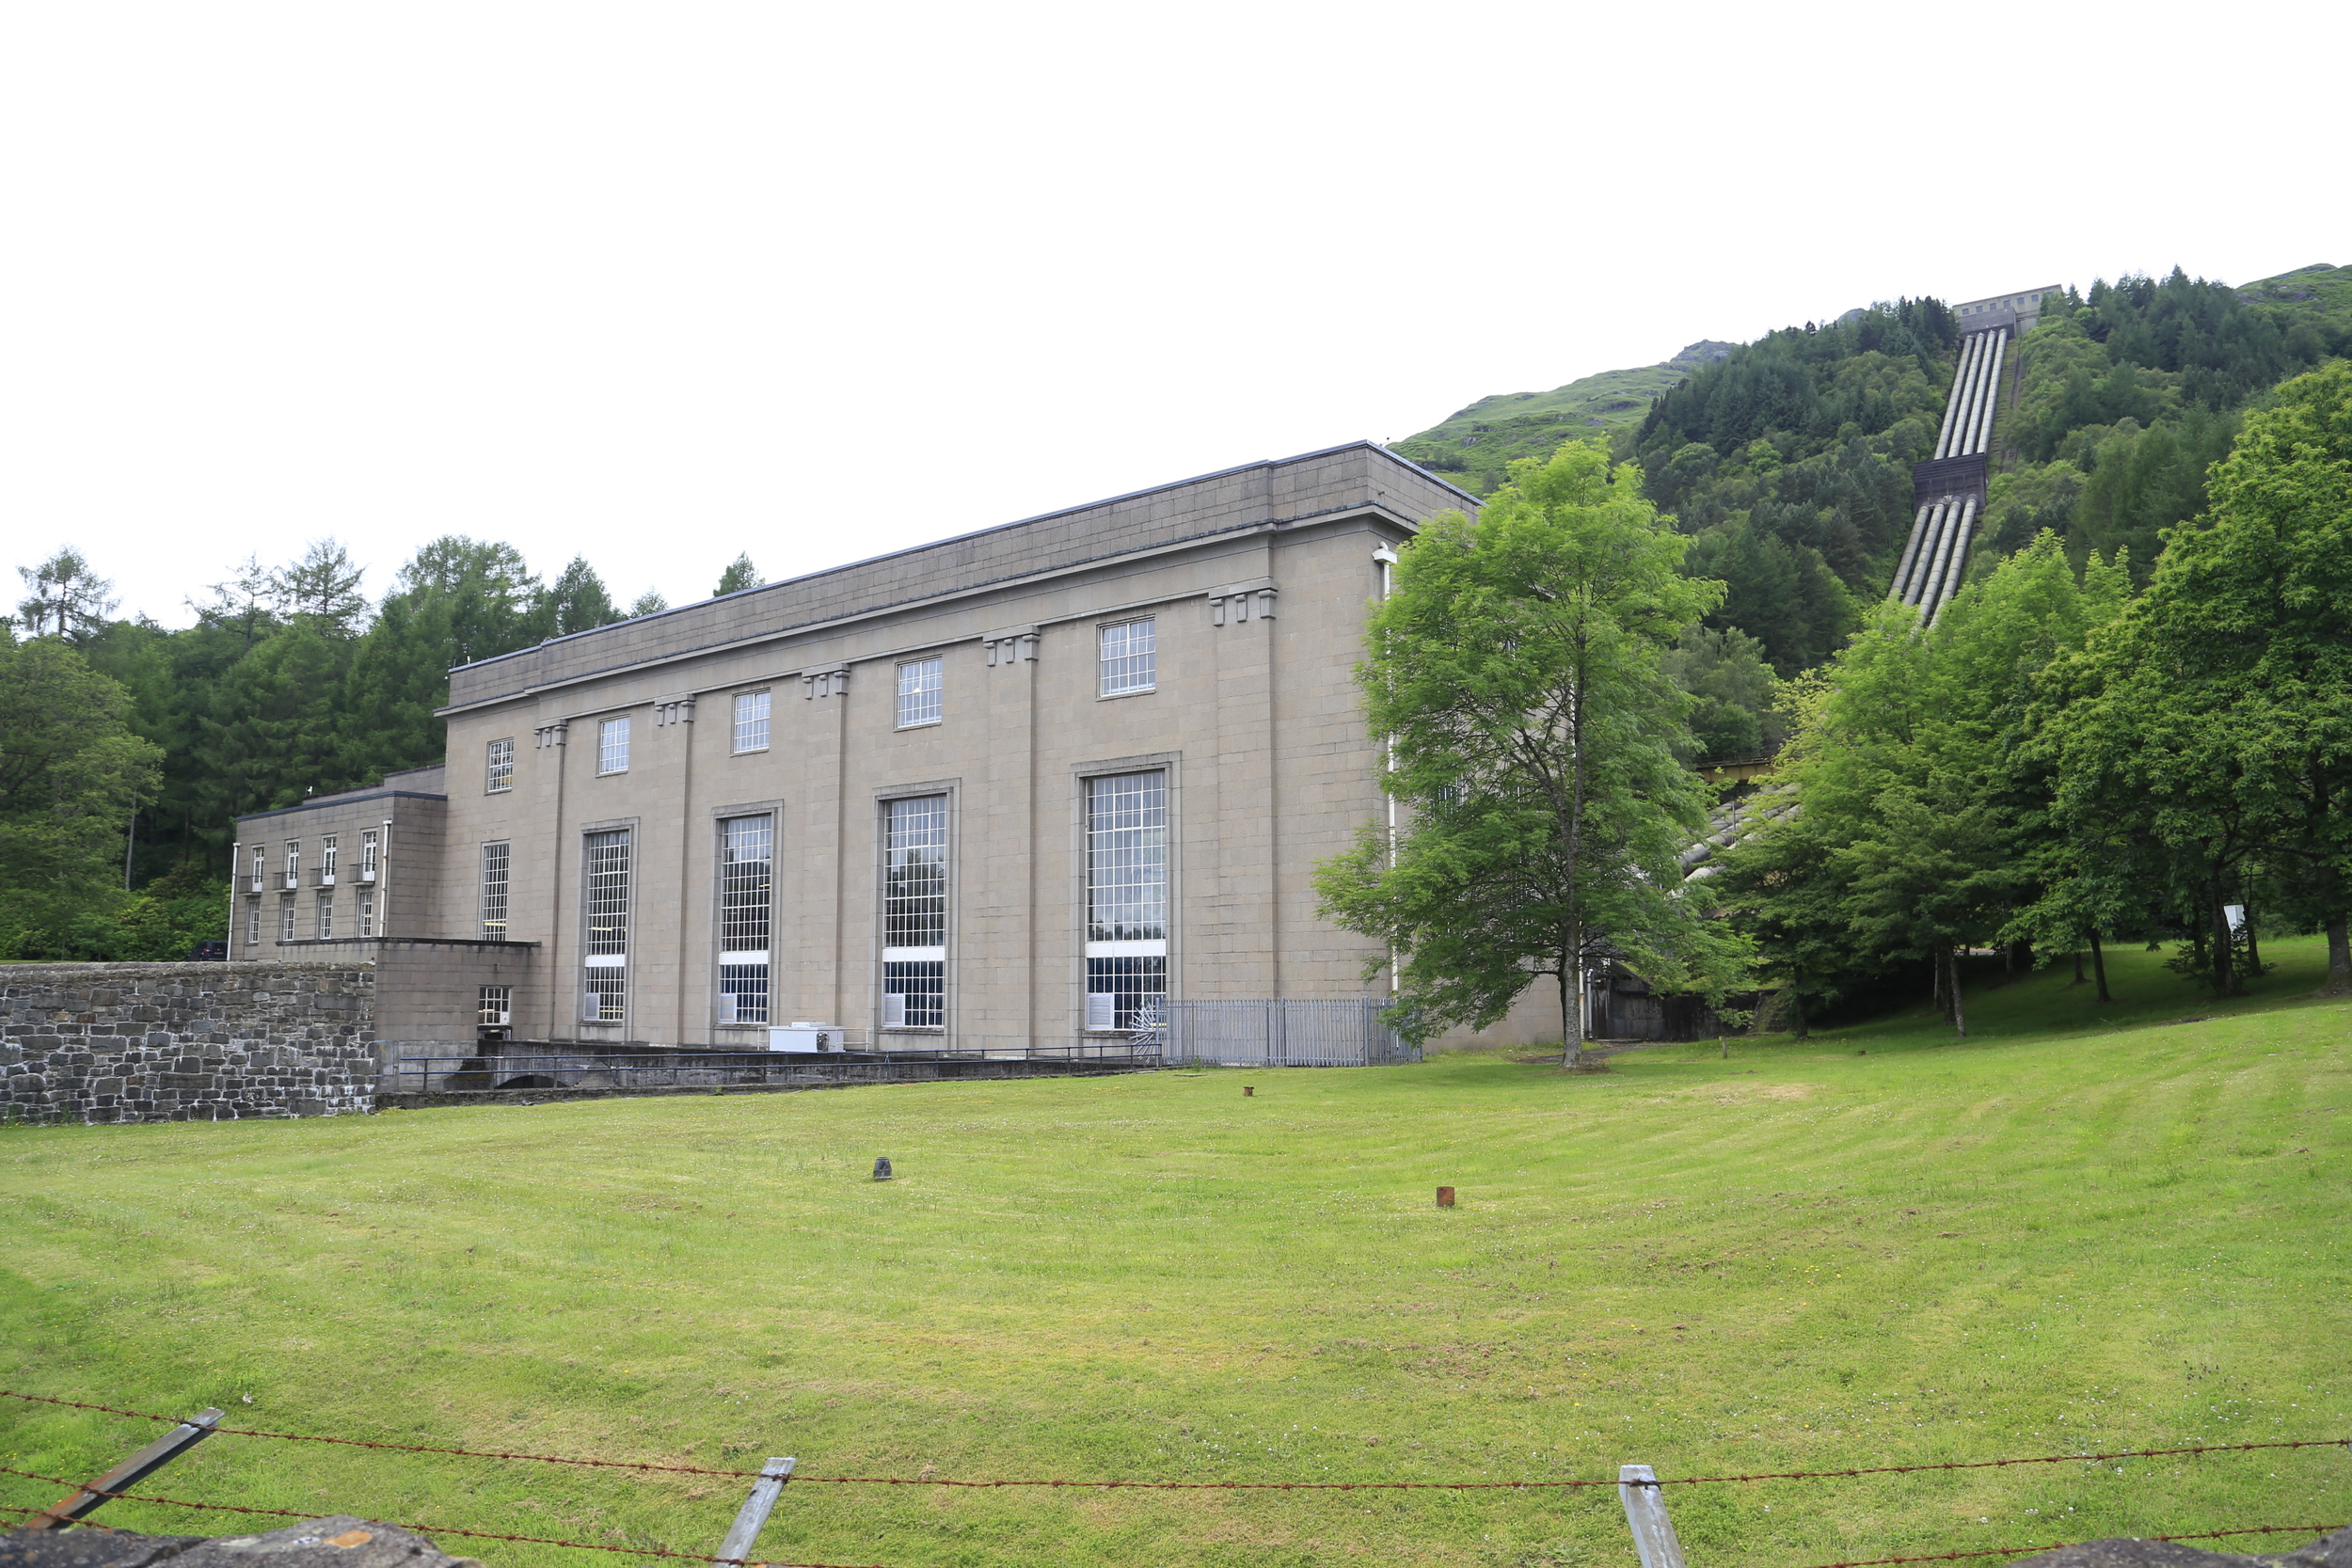 hydro, power station, scotland, cycle, cyce touring, cycle holiday, bicycle touring